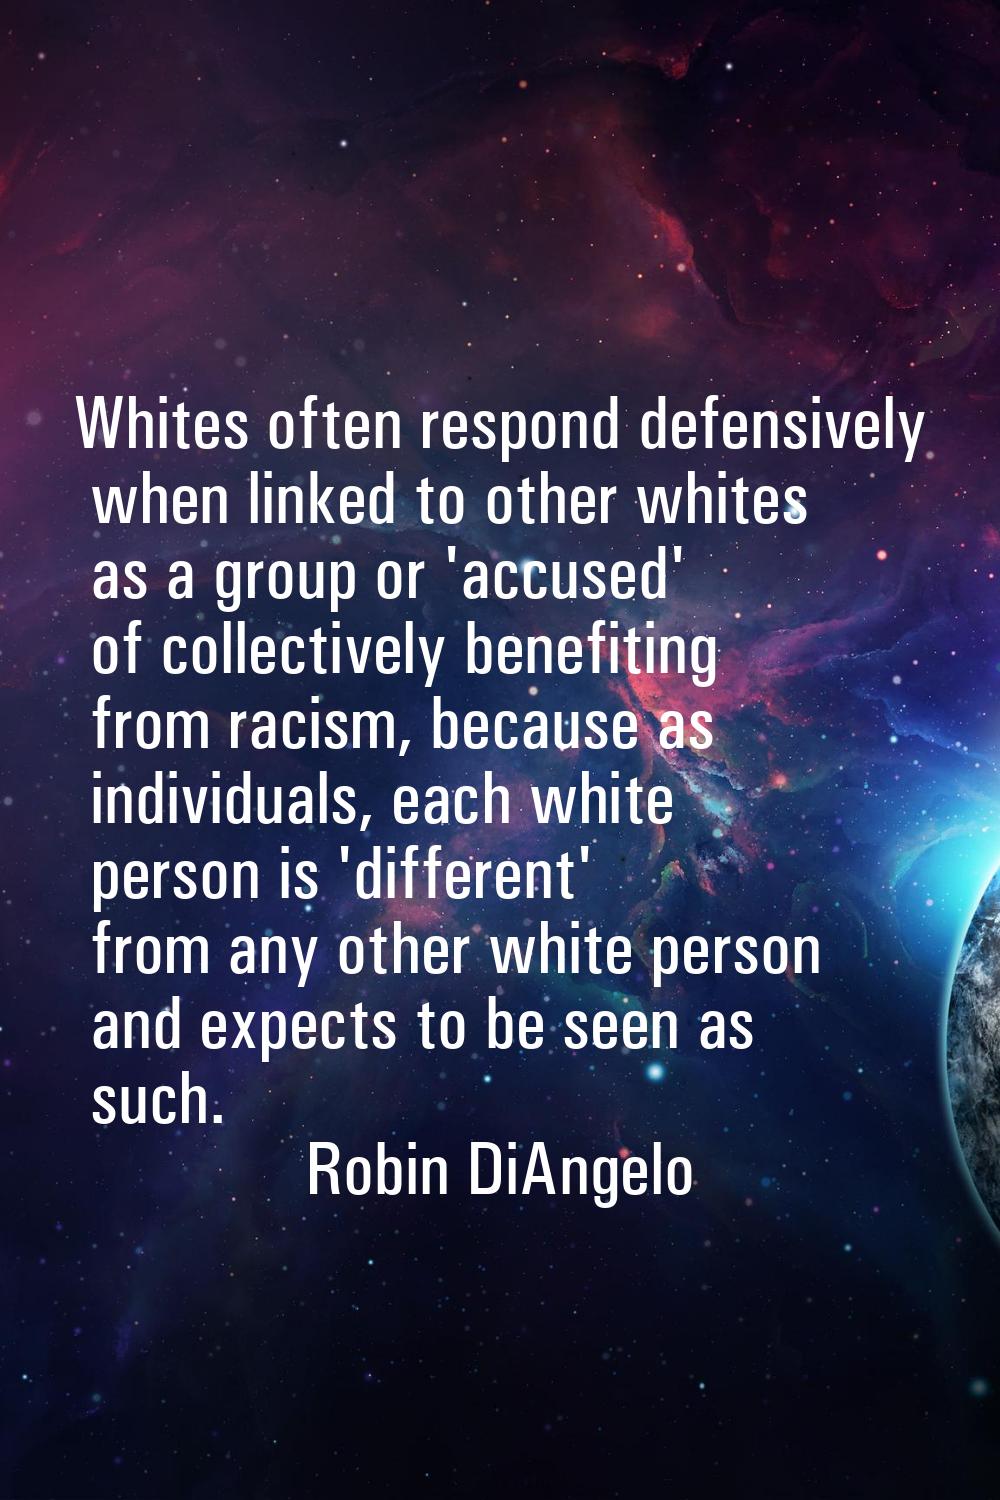 Whites often respond defensively when linked to other whites as a group or 'accused' of collectivel